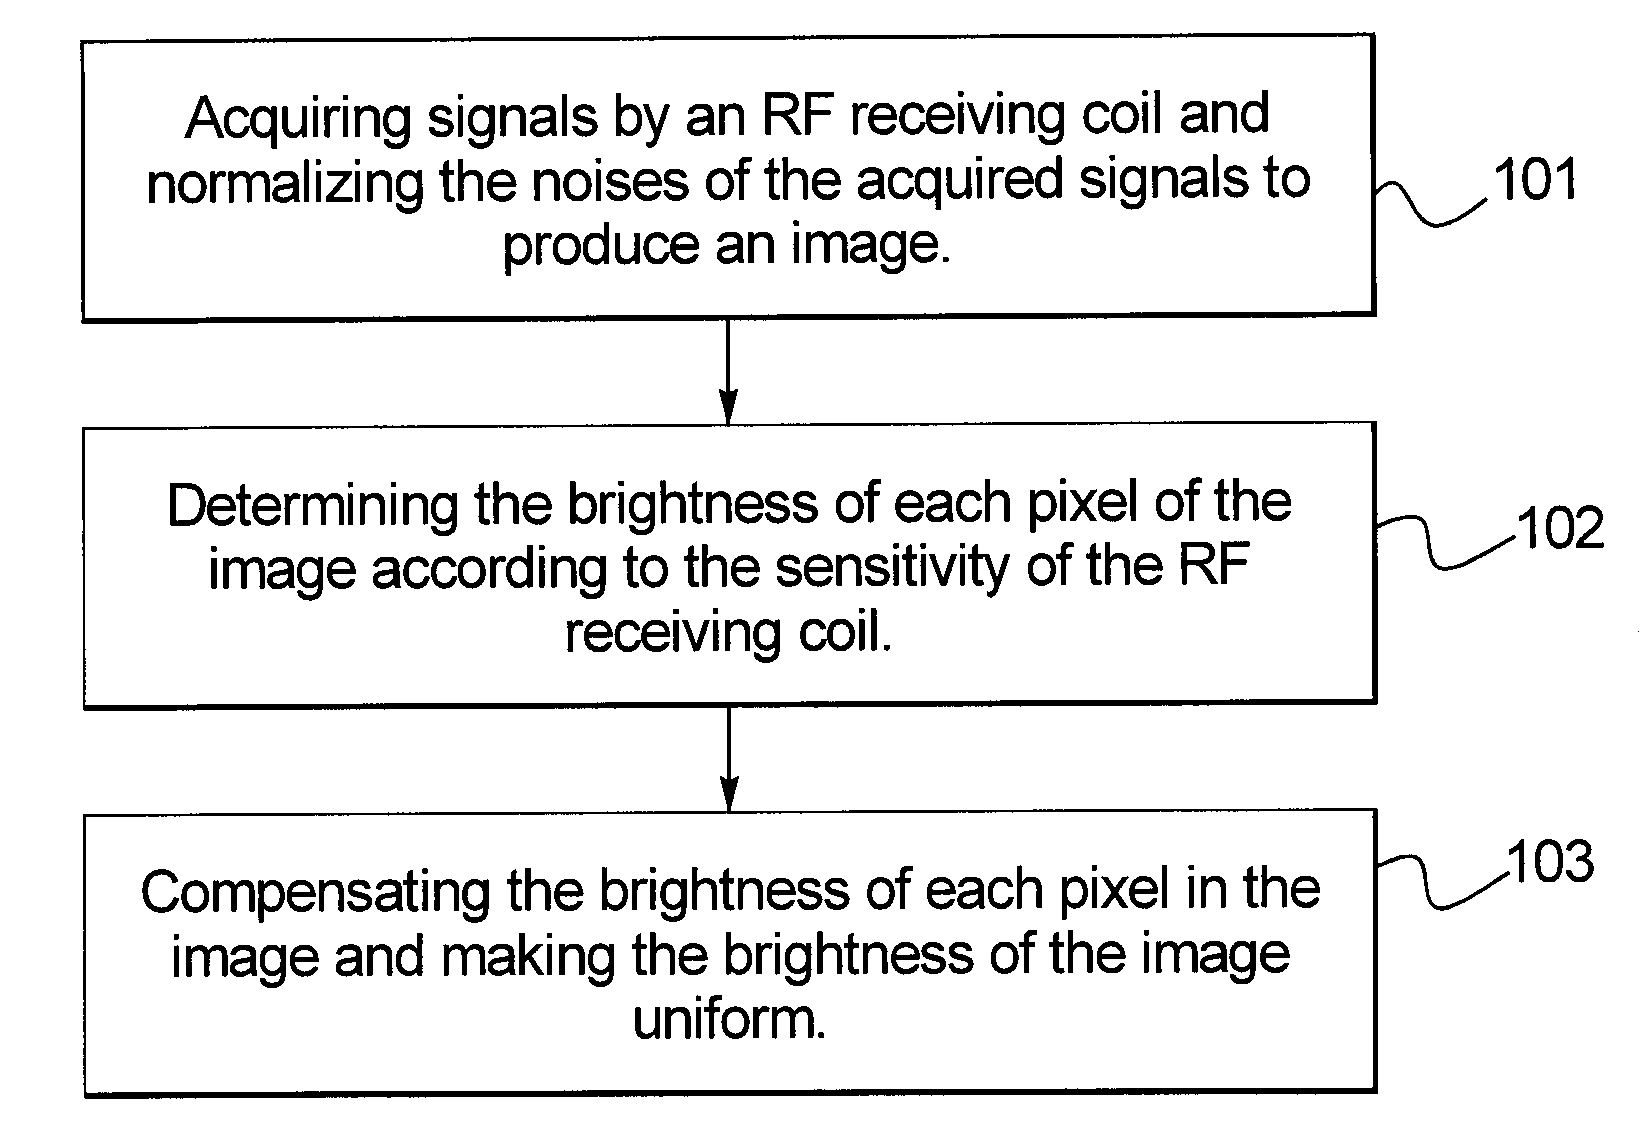 Method and apparatus for improving brightness uniformity in an image